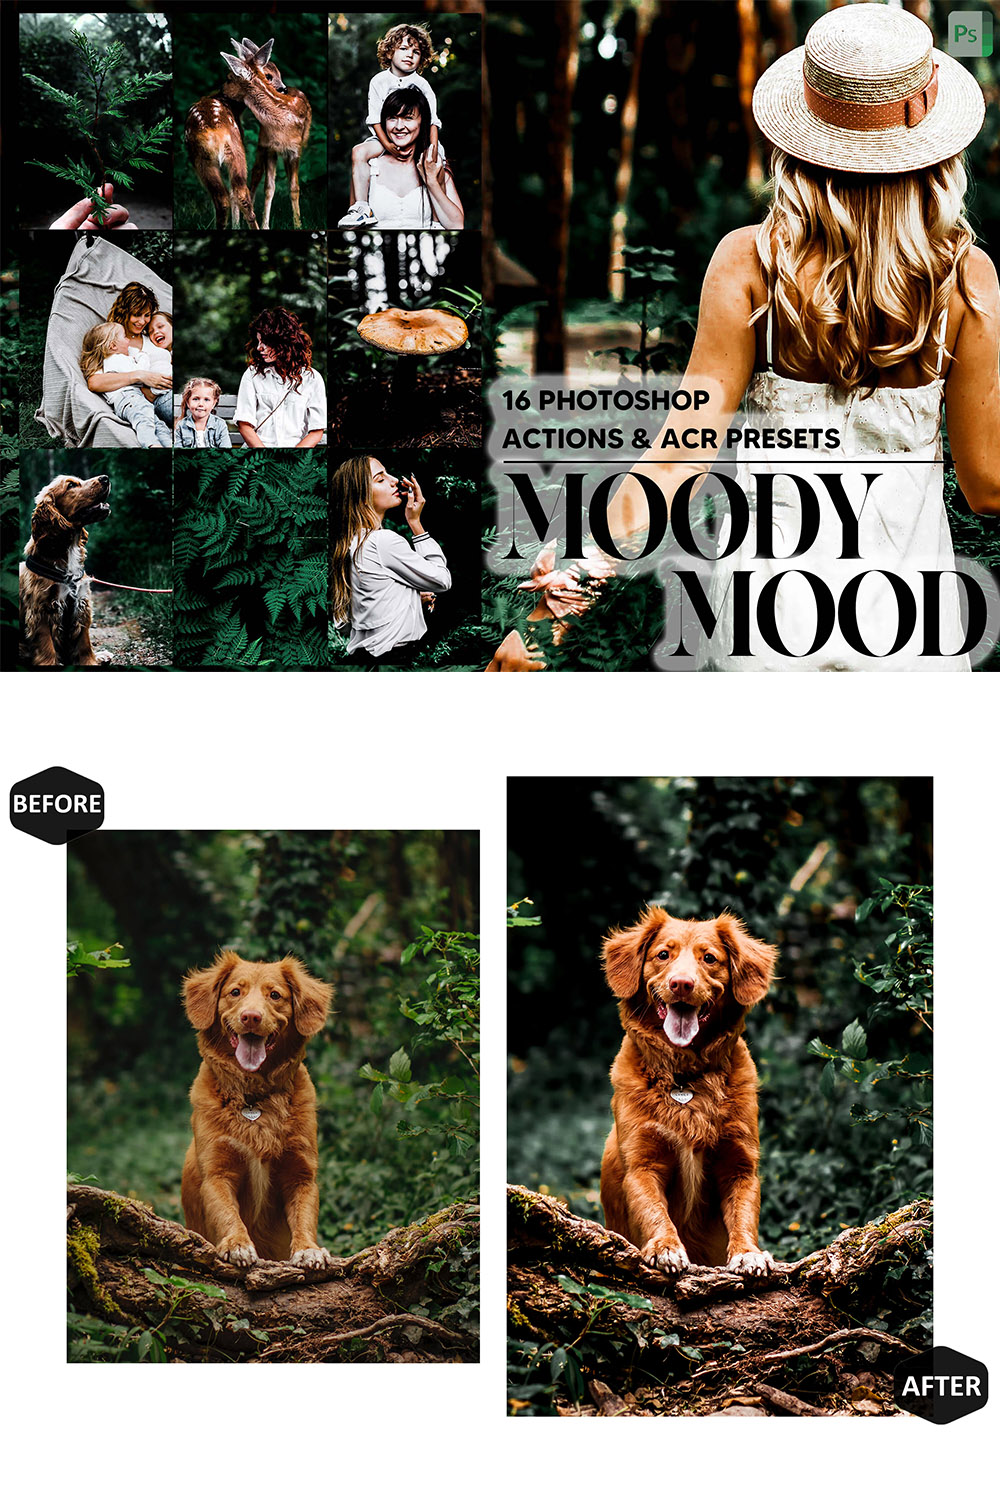 16 Photoshop Actions, Moody Mood Ps Action, Tropical ACR Preset, Dark Ps Filter, Atn Portrait And Lifestyle Theme For Instagram, Blogger pinterest preview image.